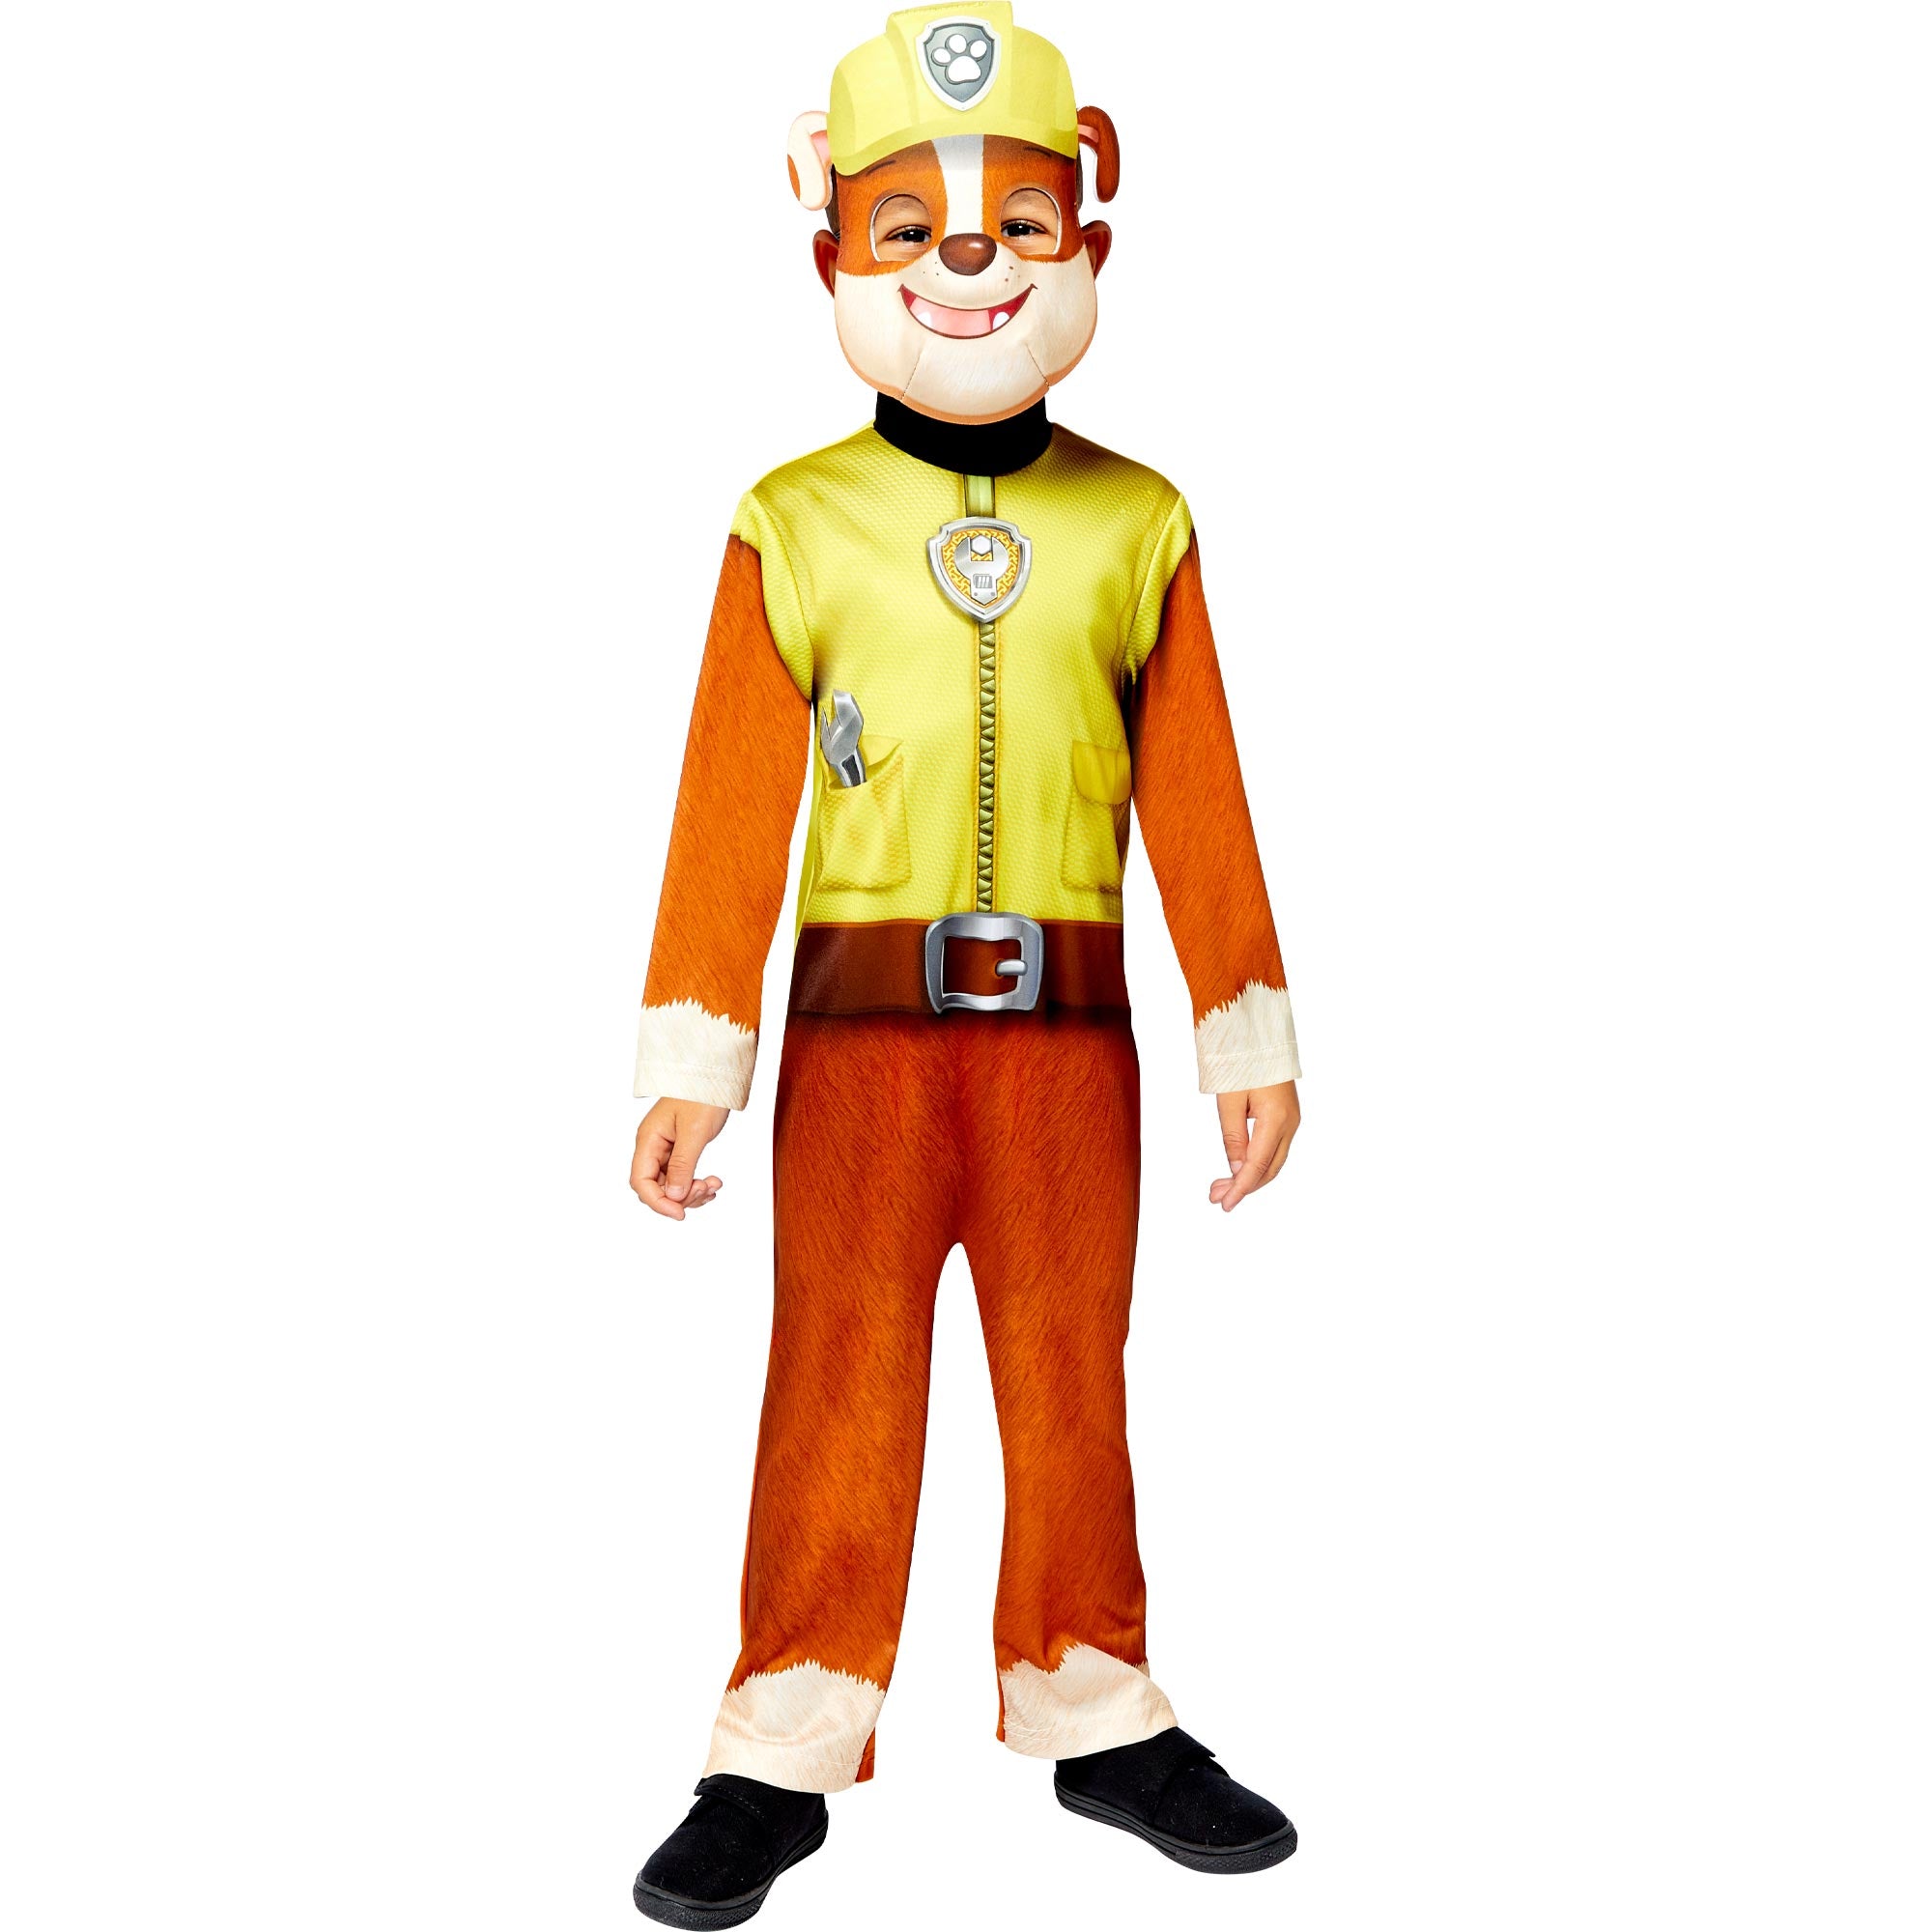 Costume Paw Patrol Rubble 3-4 Years Jumpsuit & Mask